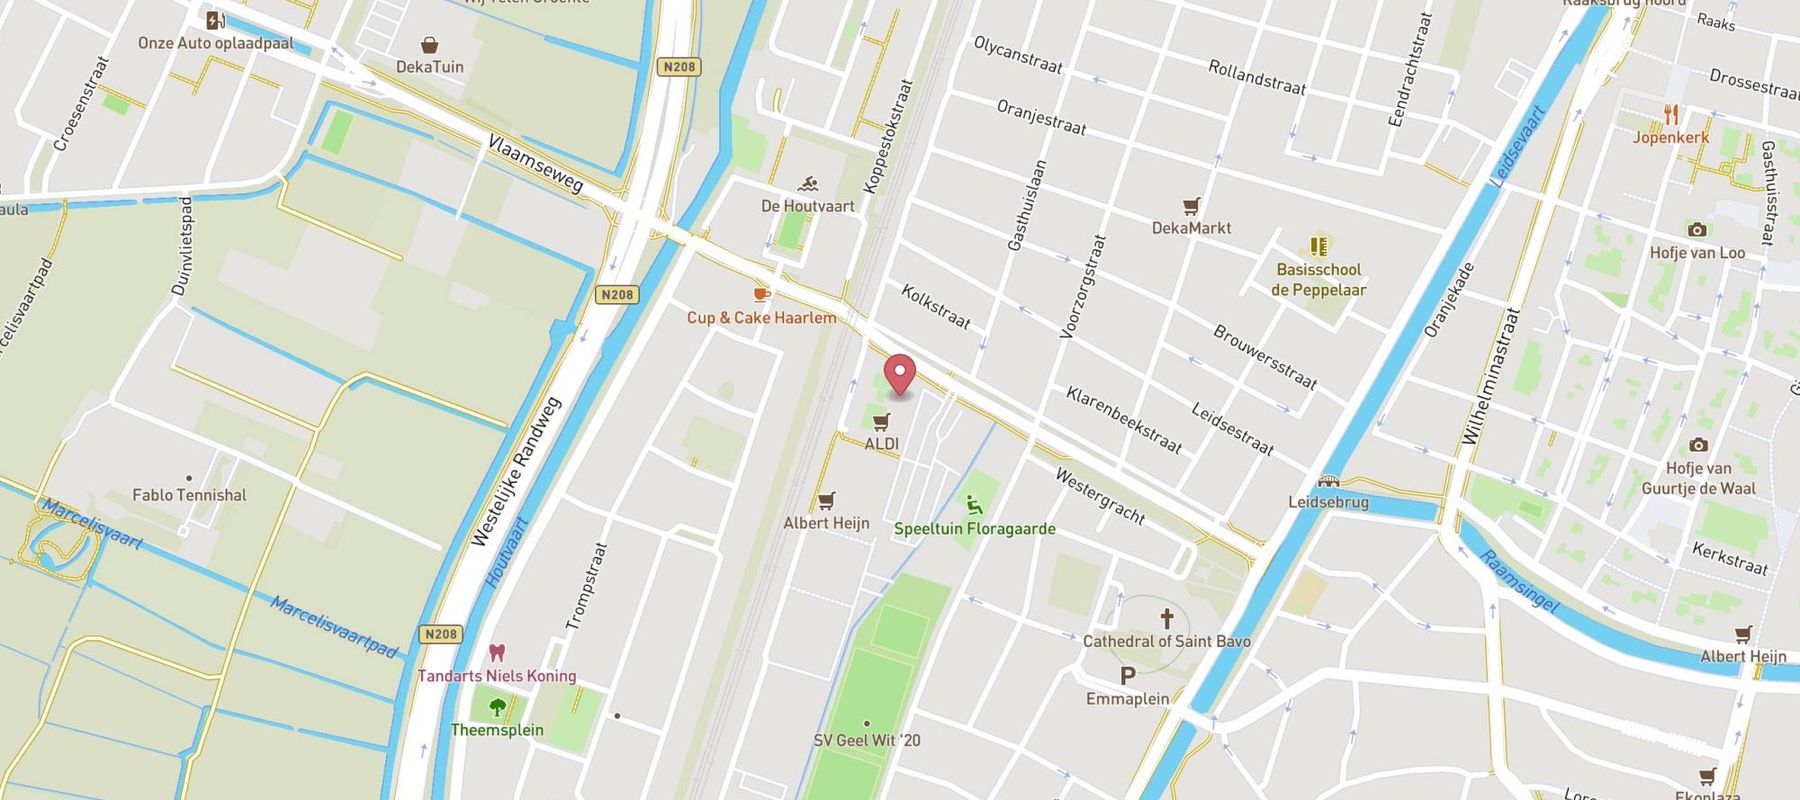 Action Haarlem map